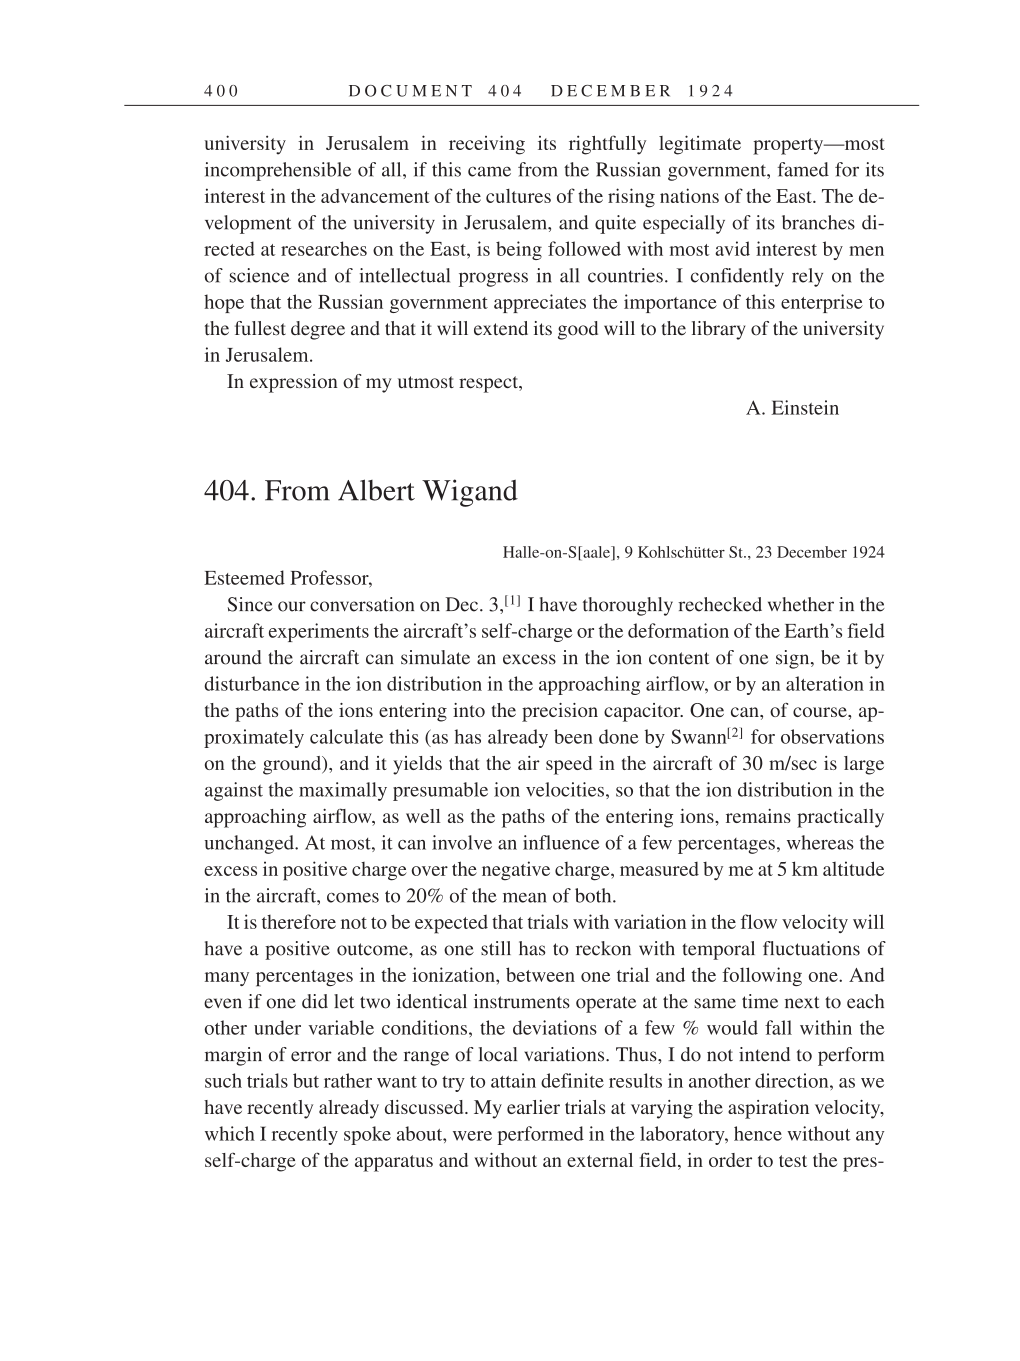 Volume 14: The Berlin Years: Writings & Correspondence, April 1923-May 1925 (English Translation Supplement) page 400